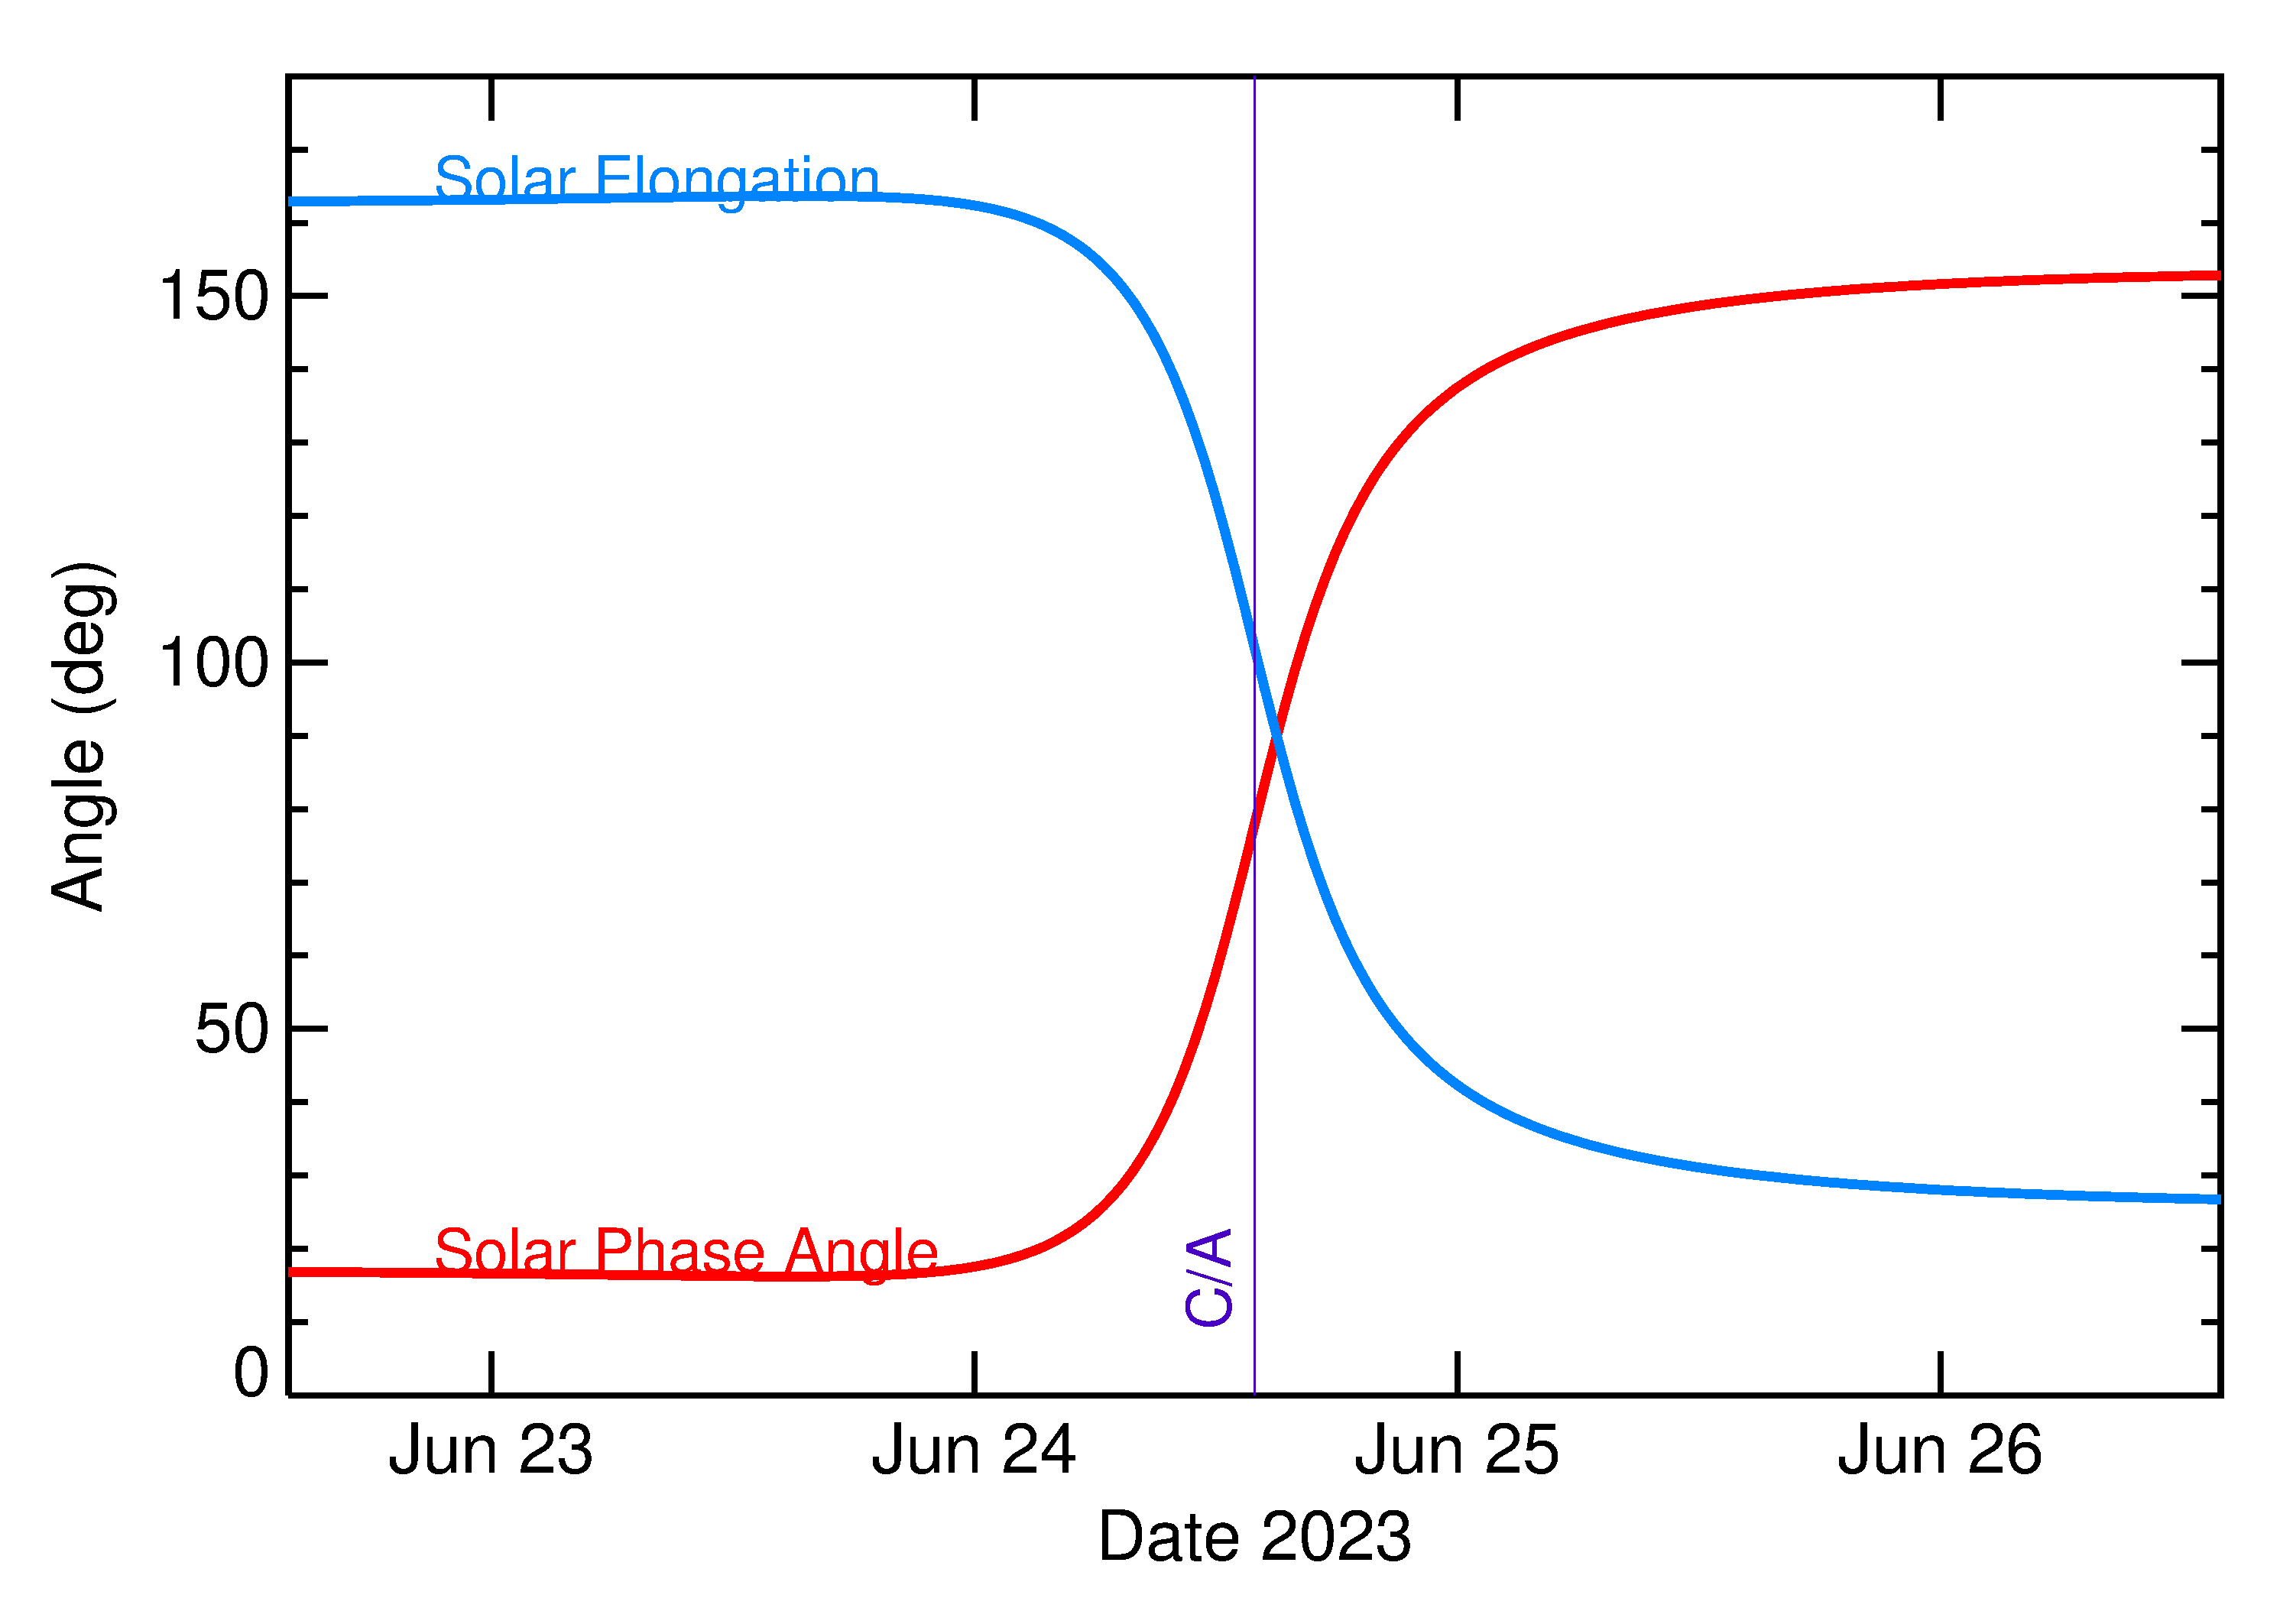 Solar Elongation and Solar Phase Angle of 2023 ML3 in the days around closest approach